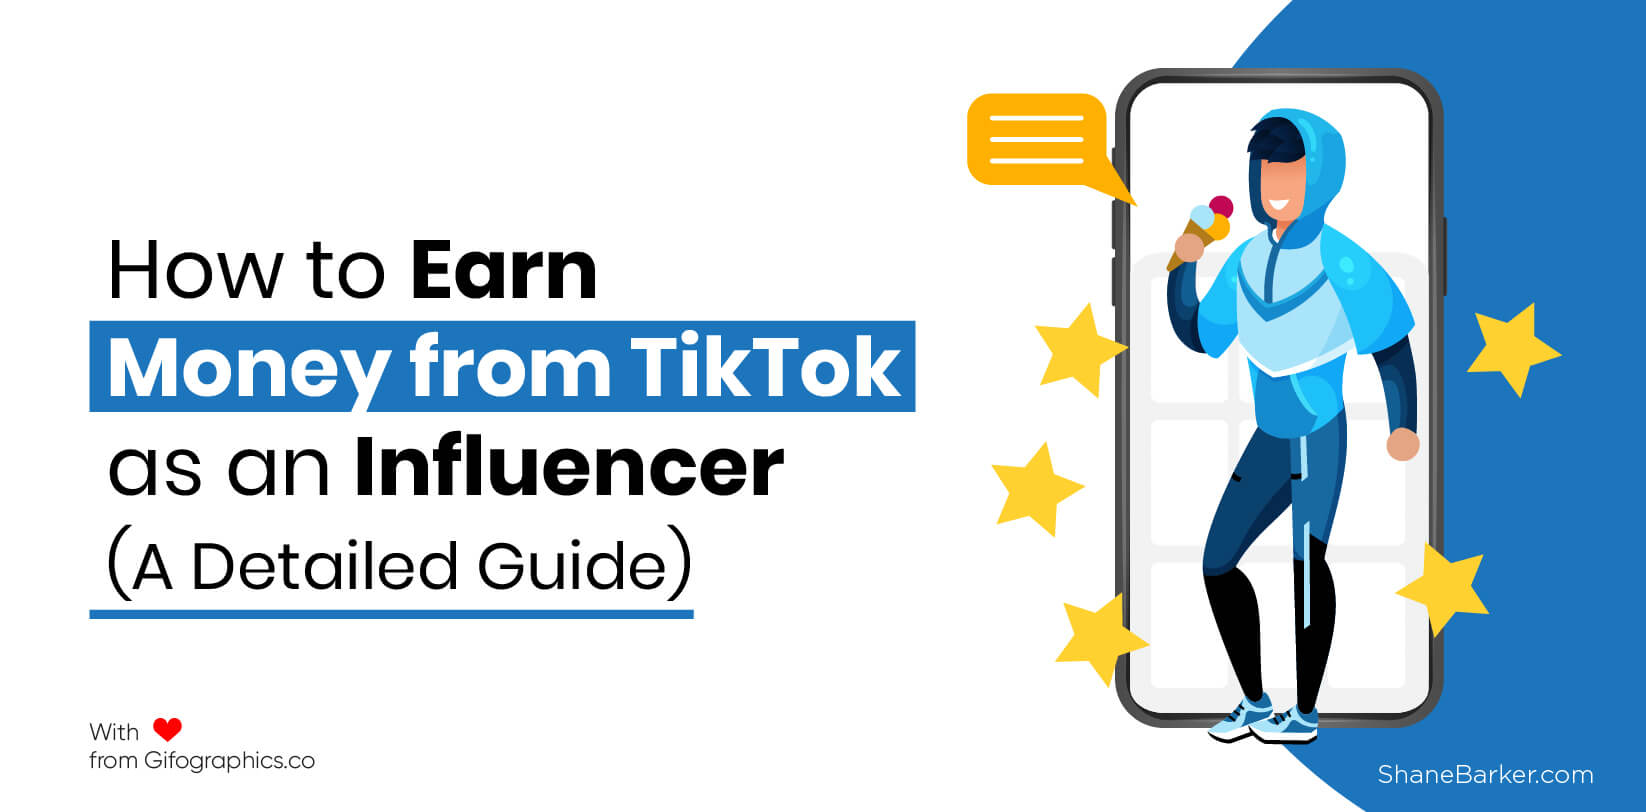 How to Earn Money from TikTok as an Influencer